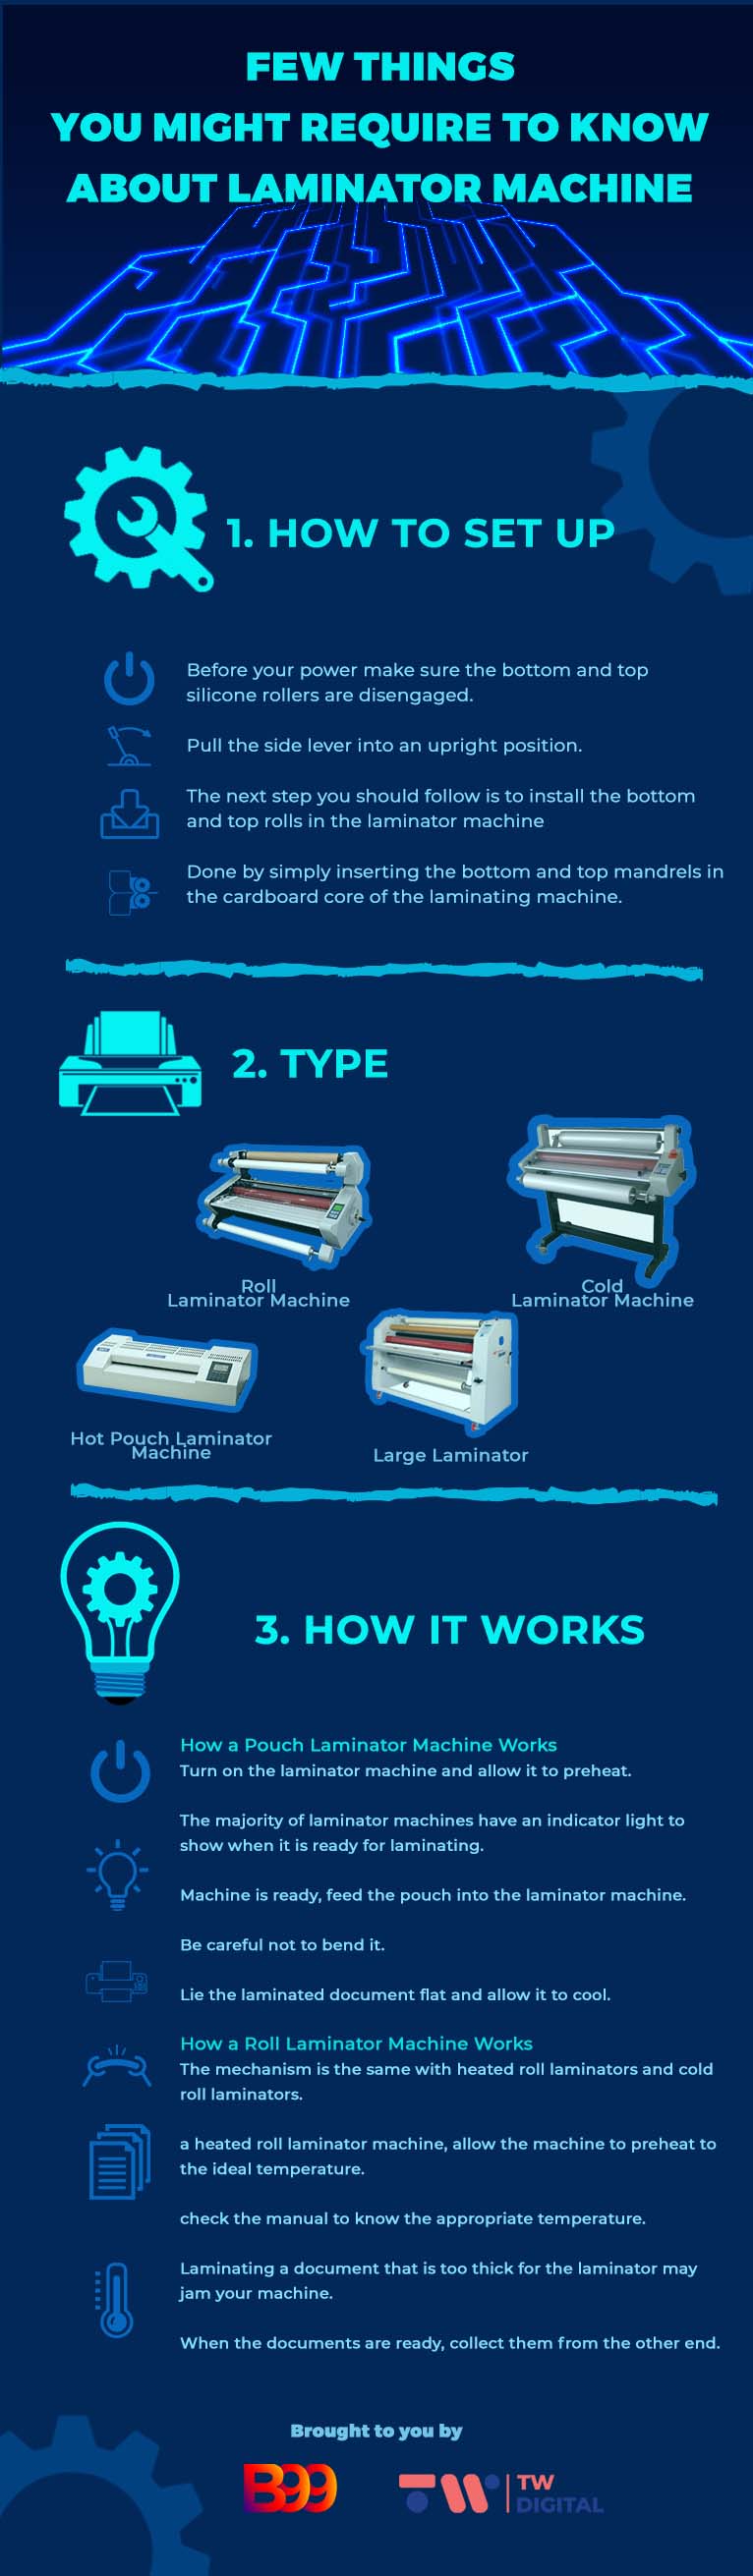 [infographic] Few Things You Might Require To Know About Laminator Machine